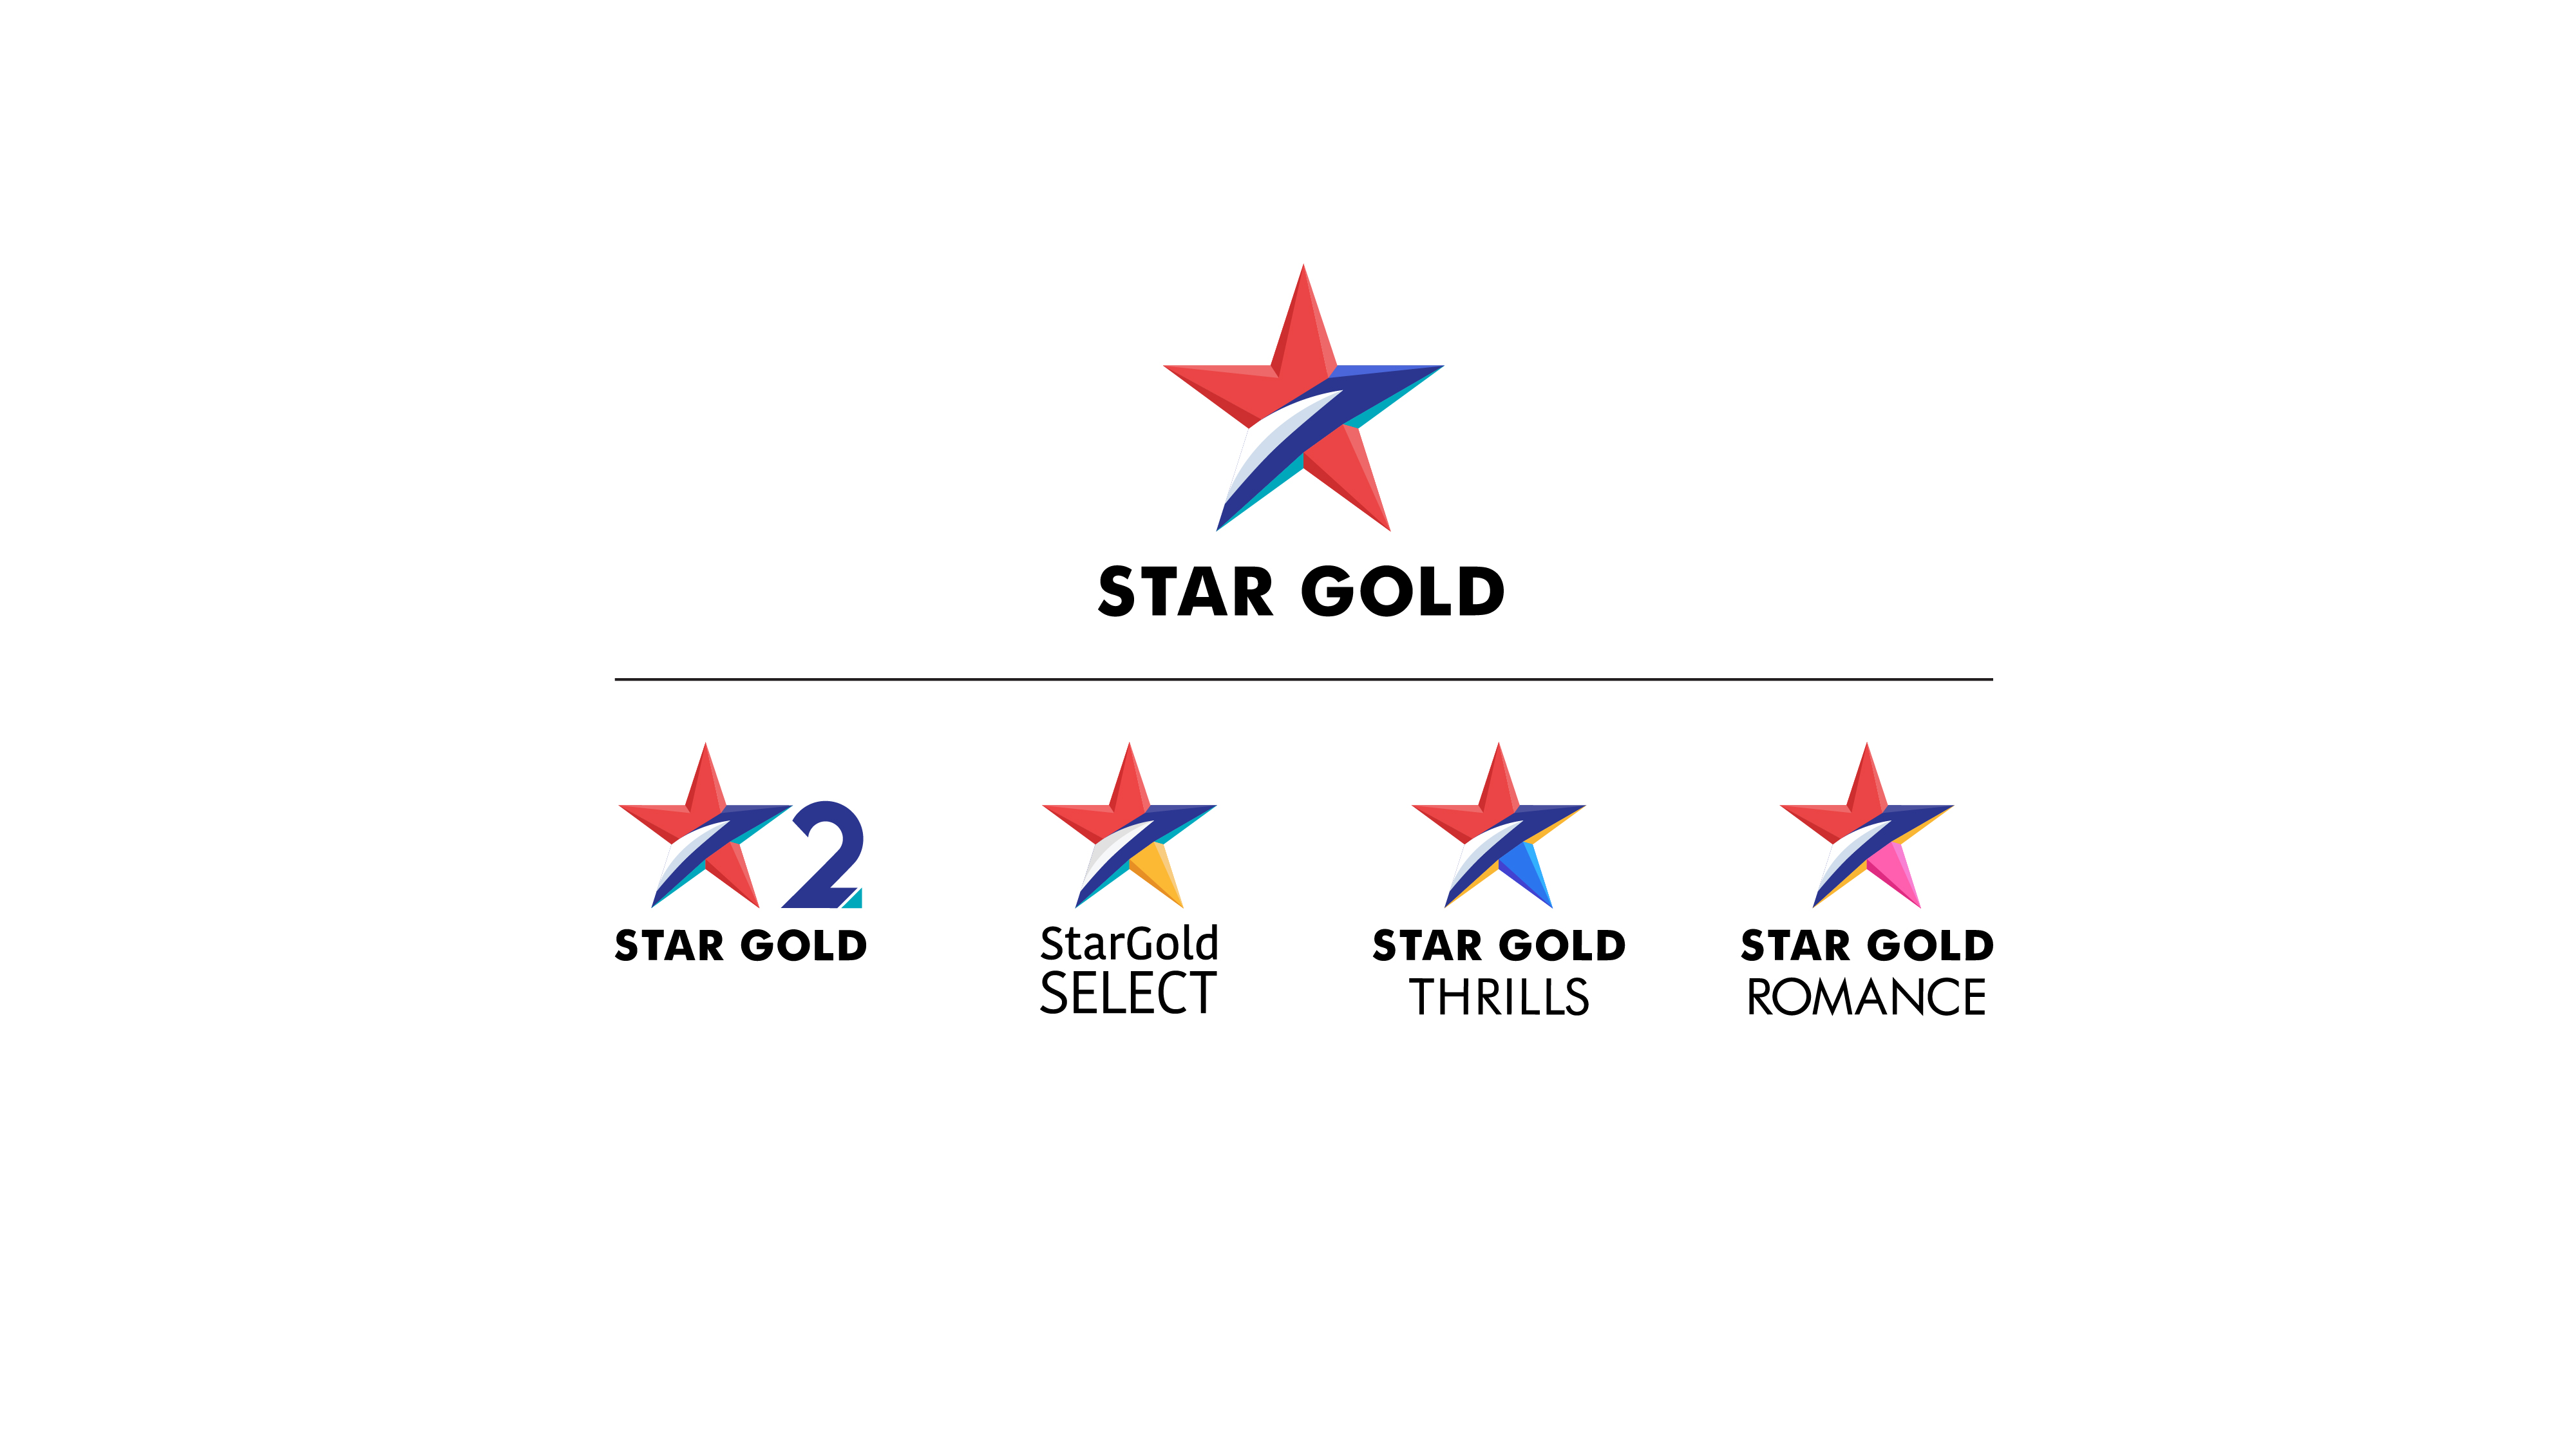 disney-star-network-expands-its-star-gold-portfolio-with-the-launch-of-star-gold-thrills-and-star-gold-romance